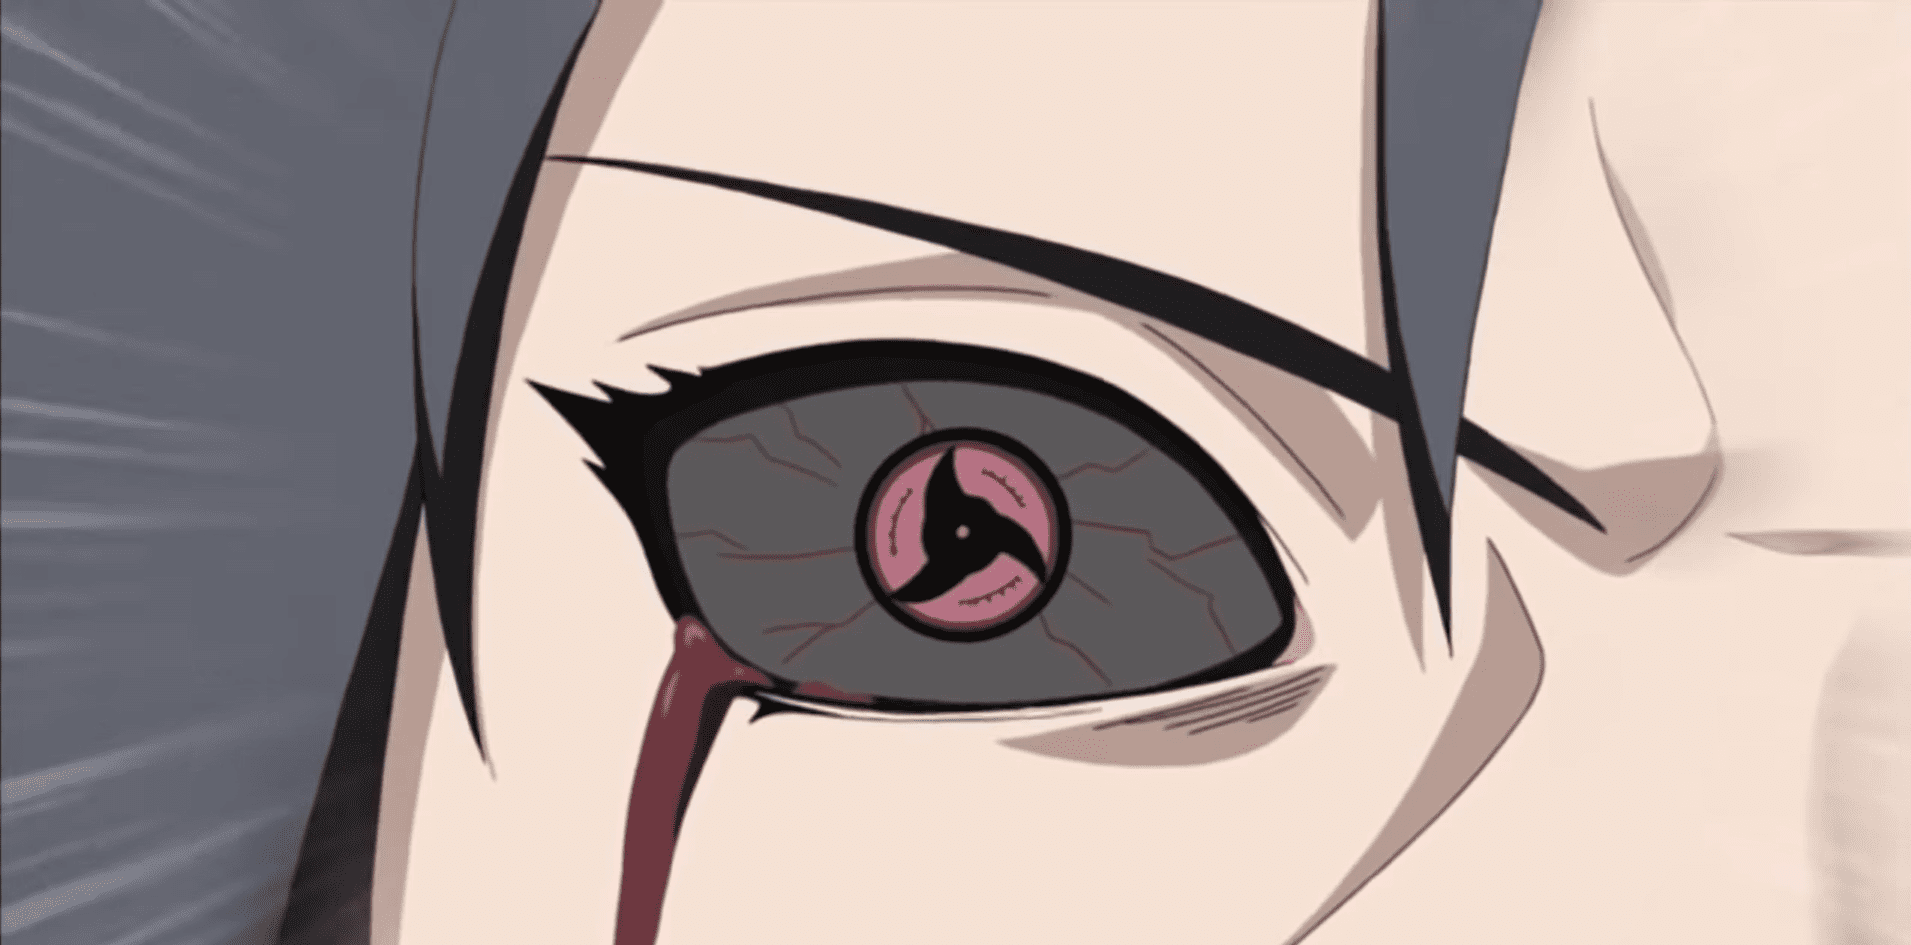 how to get the sharingan